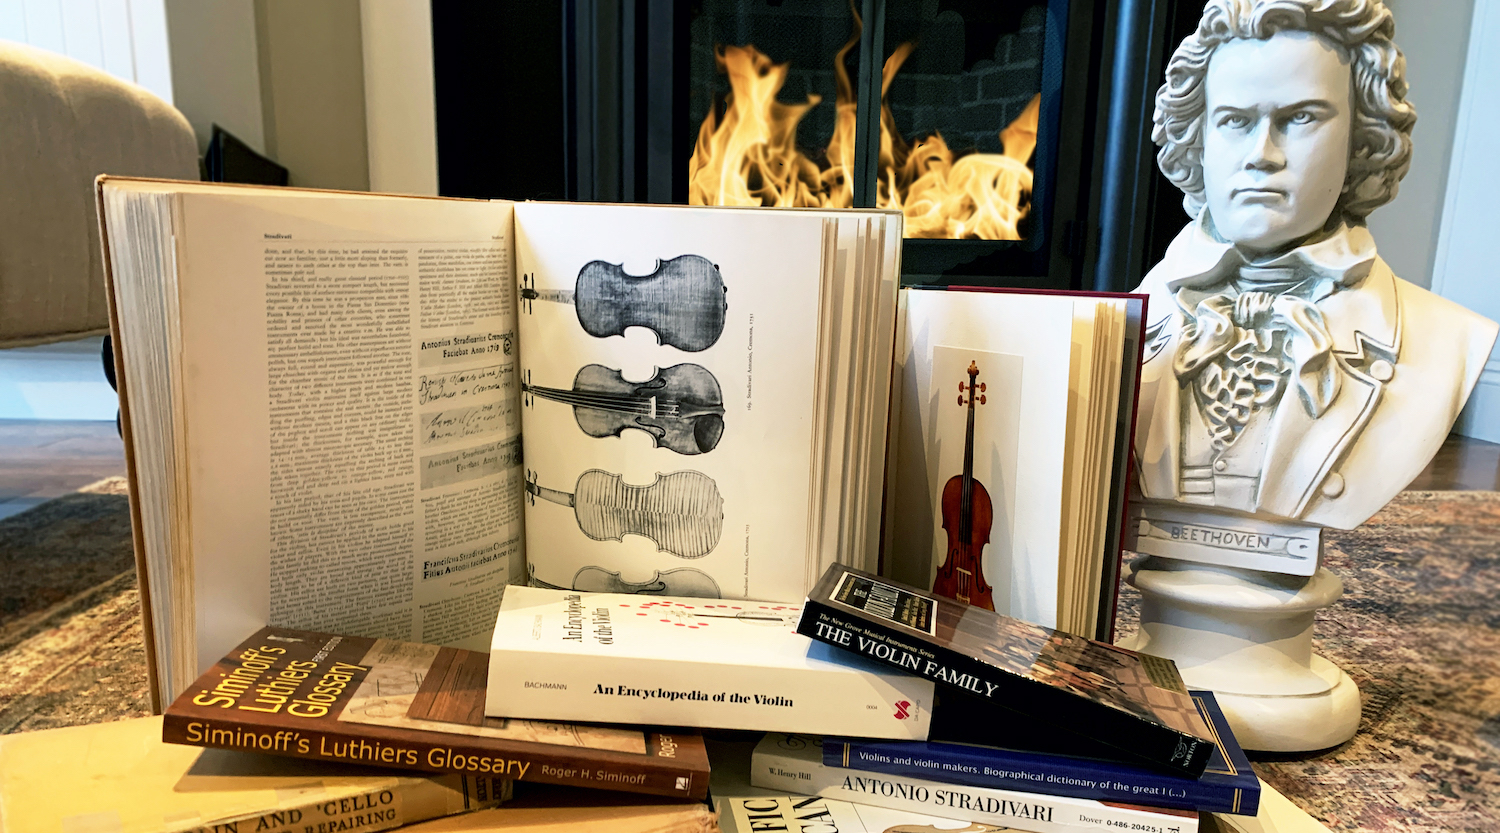 stack of books and Beethoven bust in front of a fireplace